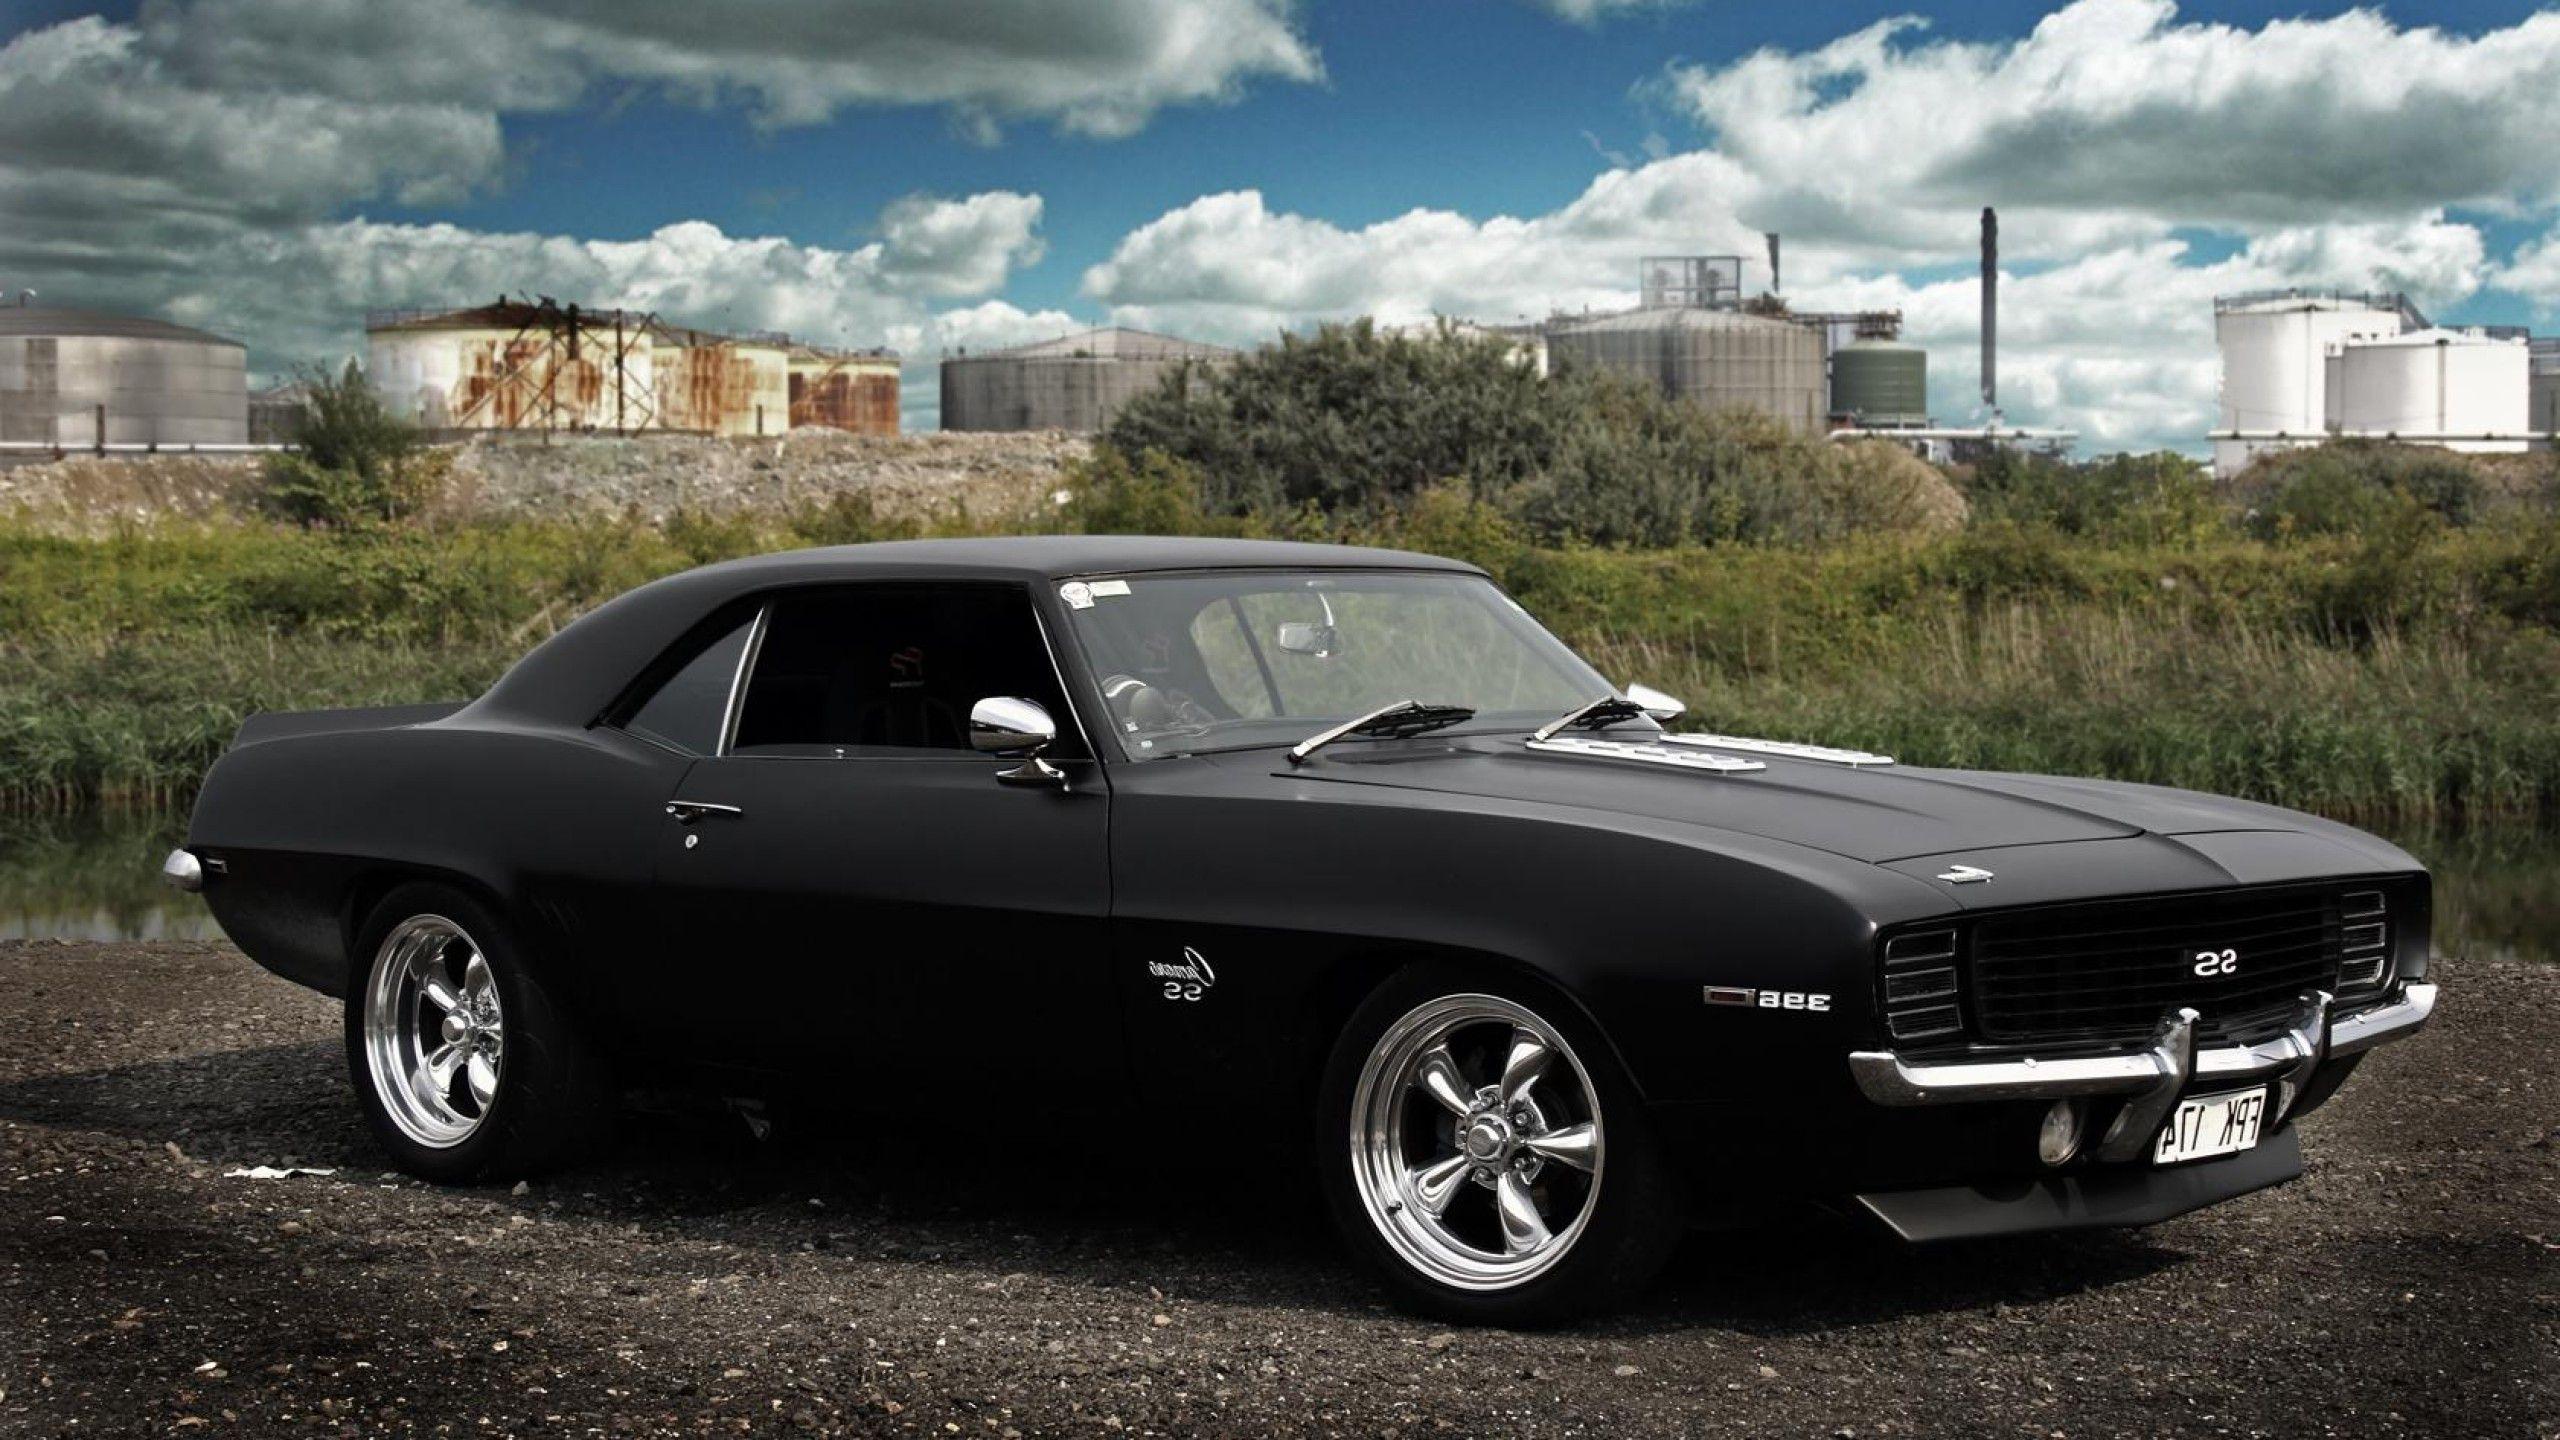 Dodge Muscle Car Wallpapers - Top Free